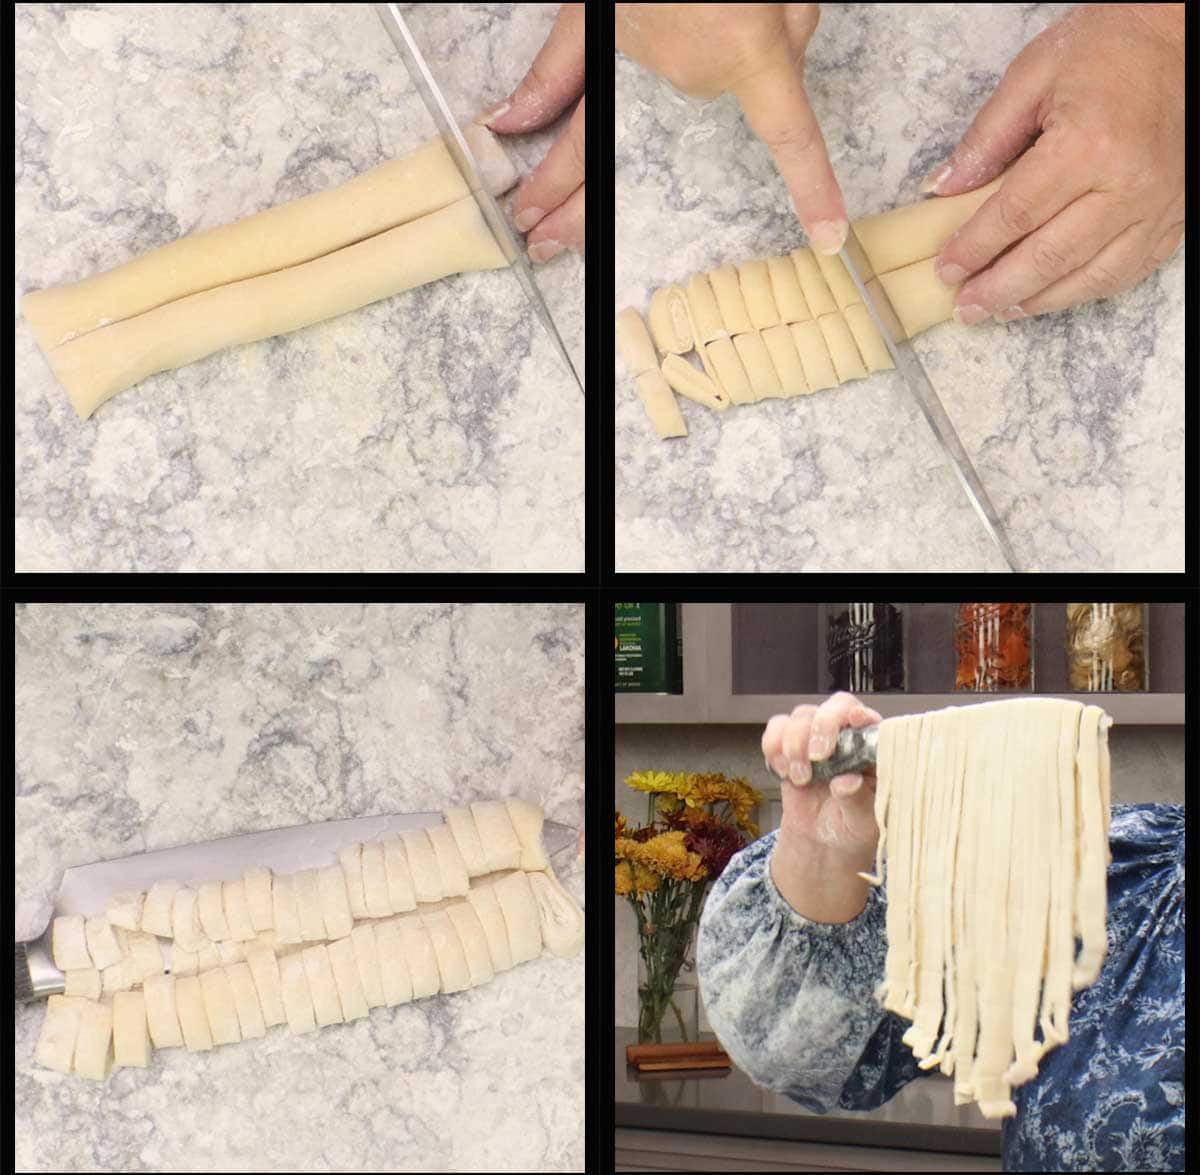 cutting the noodles and unrolling them on a knife. 